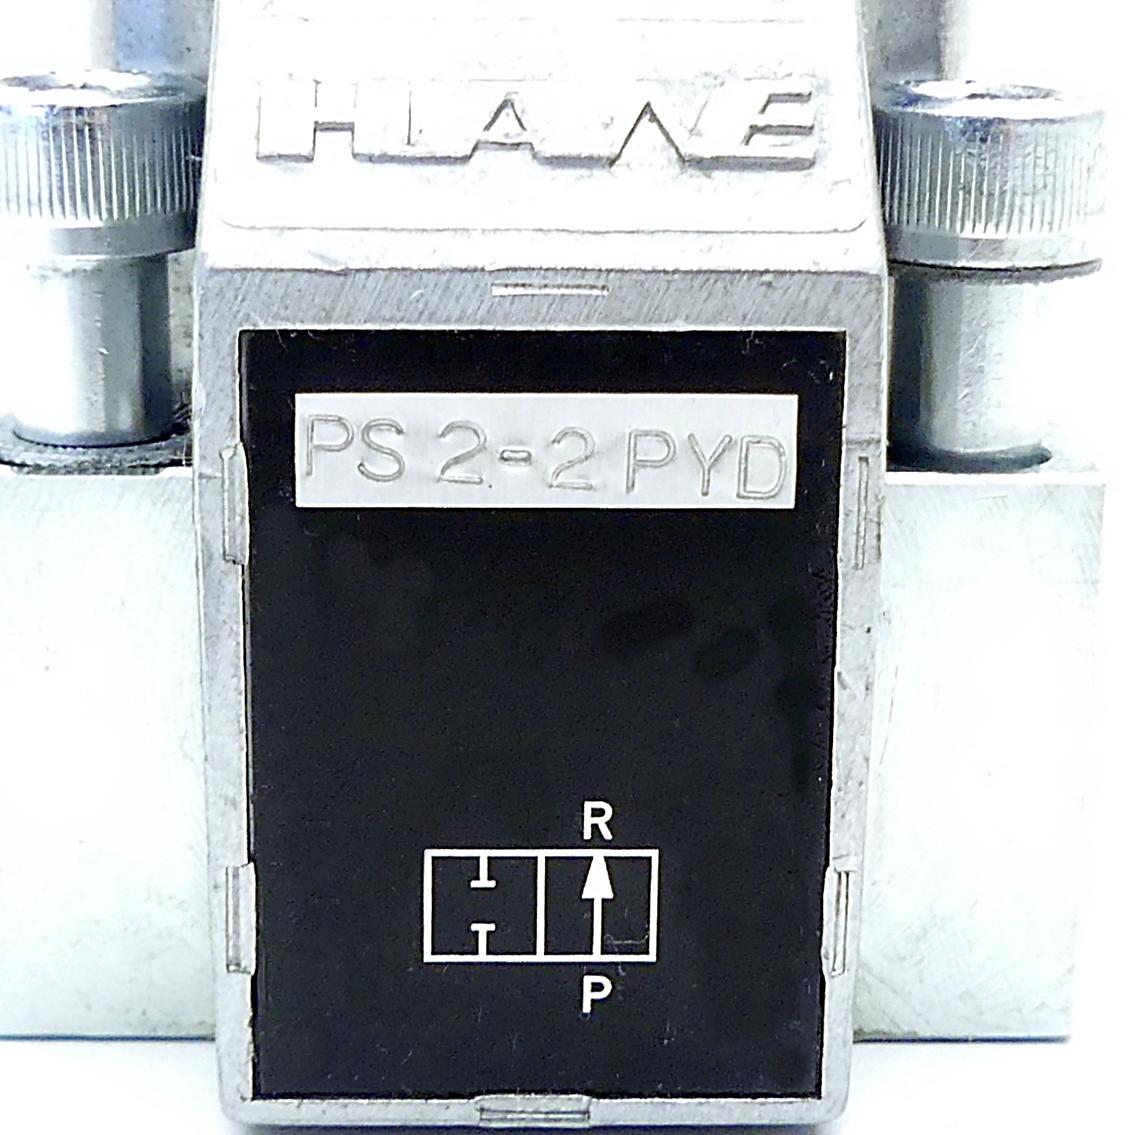 Directional Seated Valve 